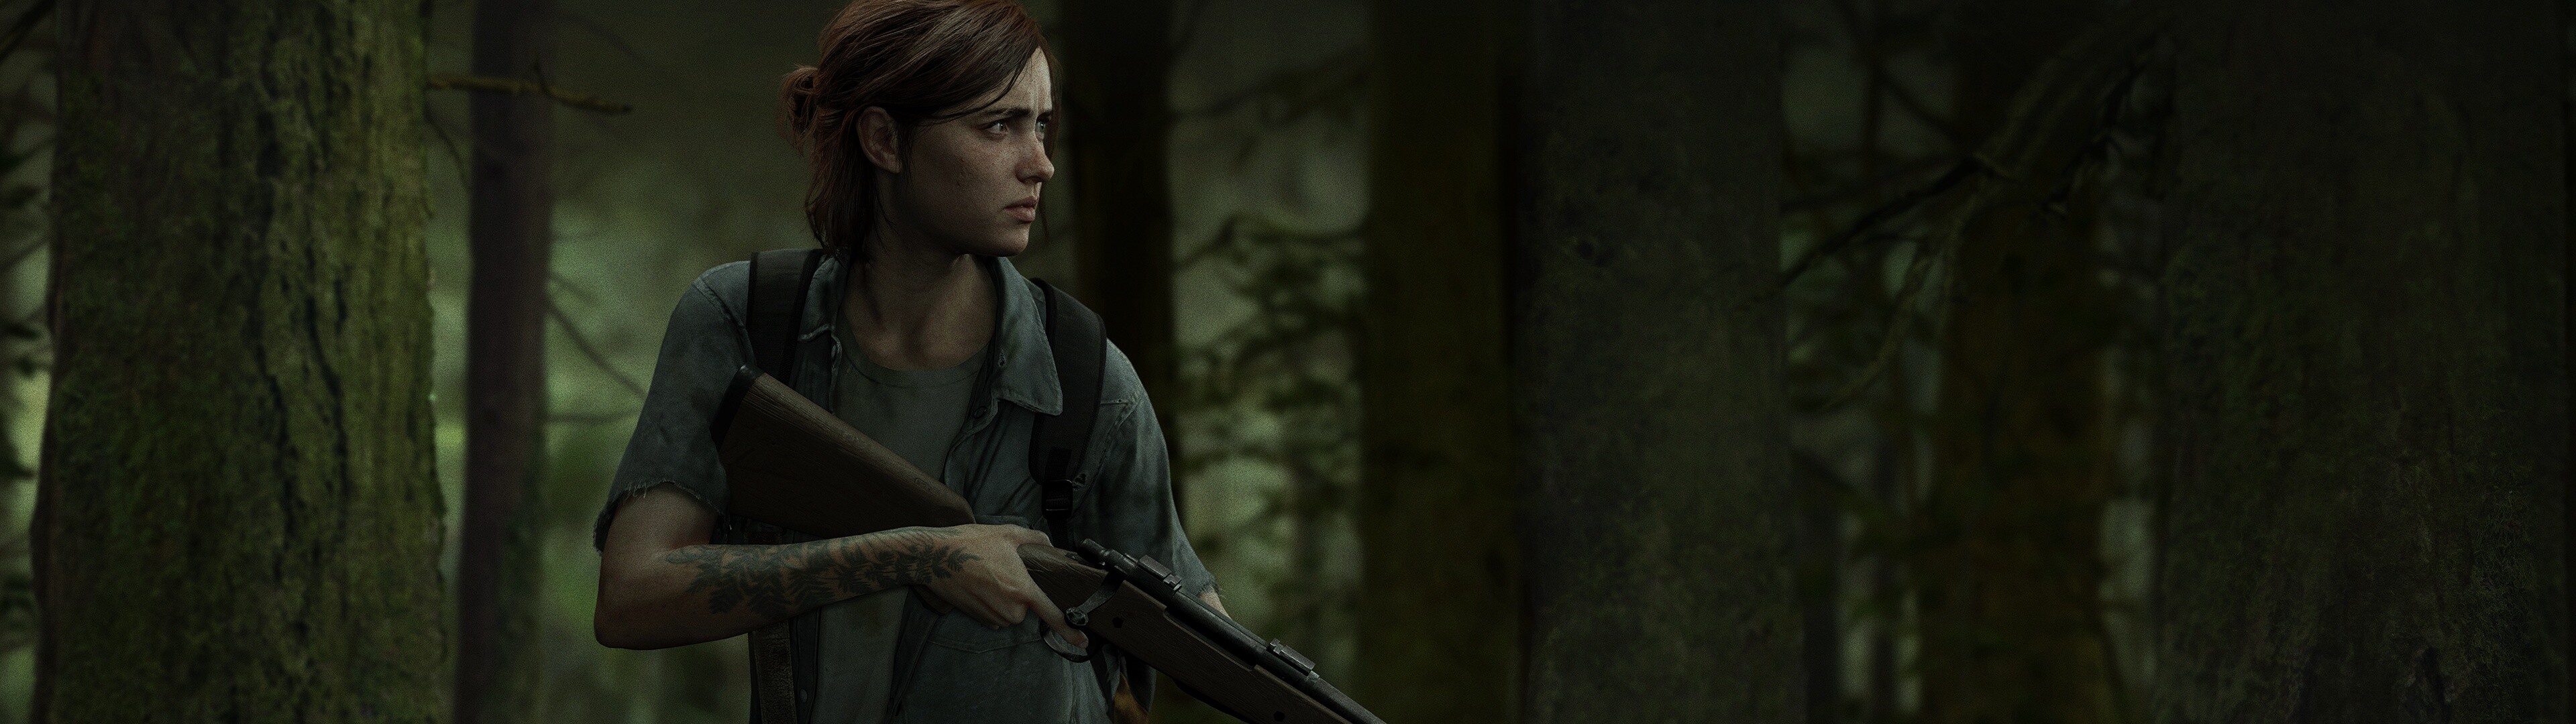 The Last of Us: The player traverses post-apocalyptic environments such as buildings and forests to advance the story, Ellie. 3840x1080 Dual Screen Background.